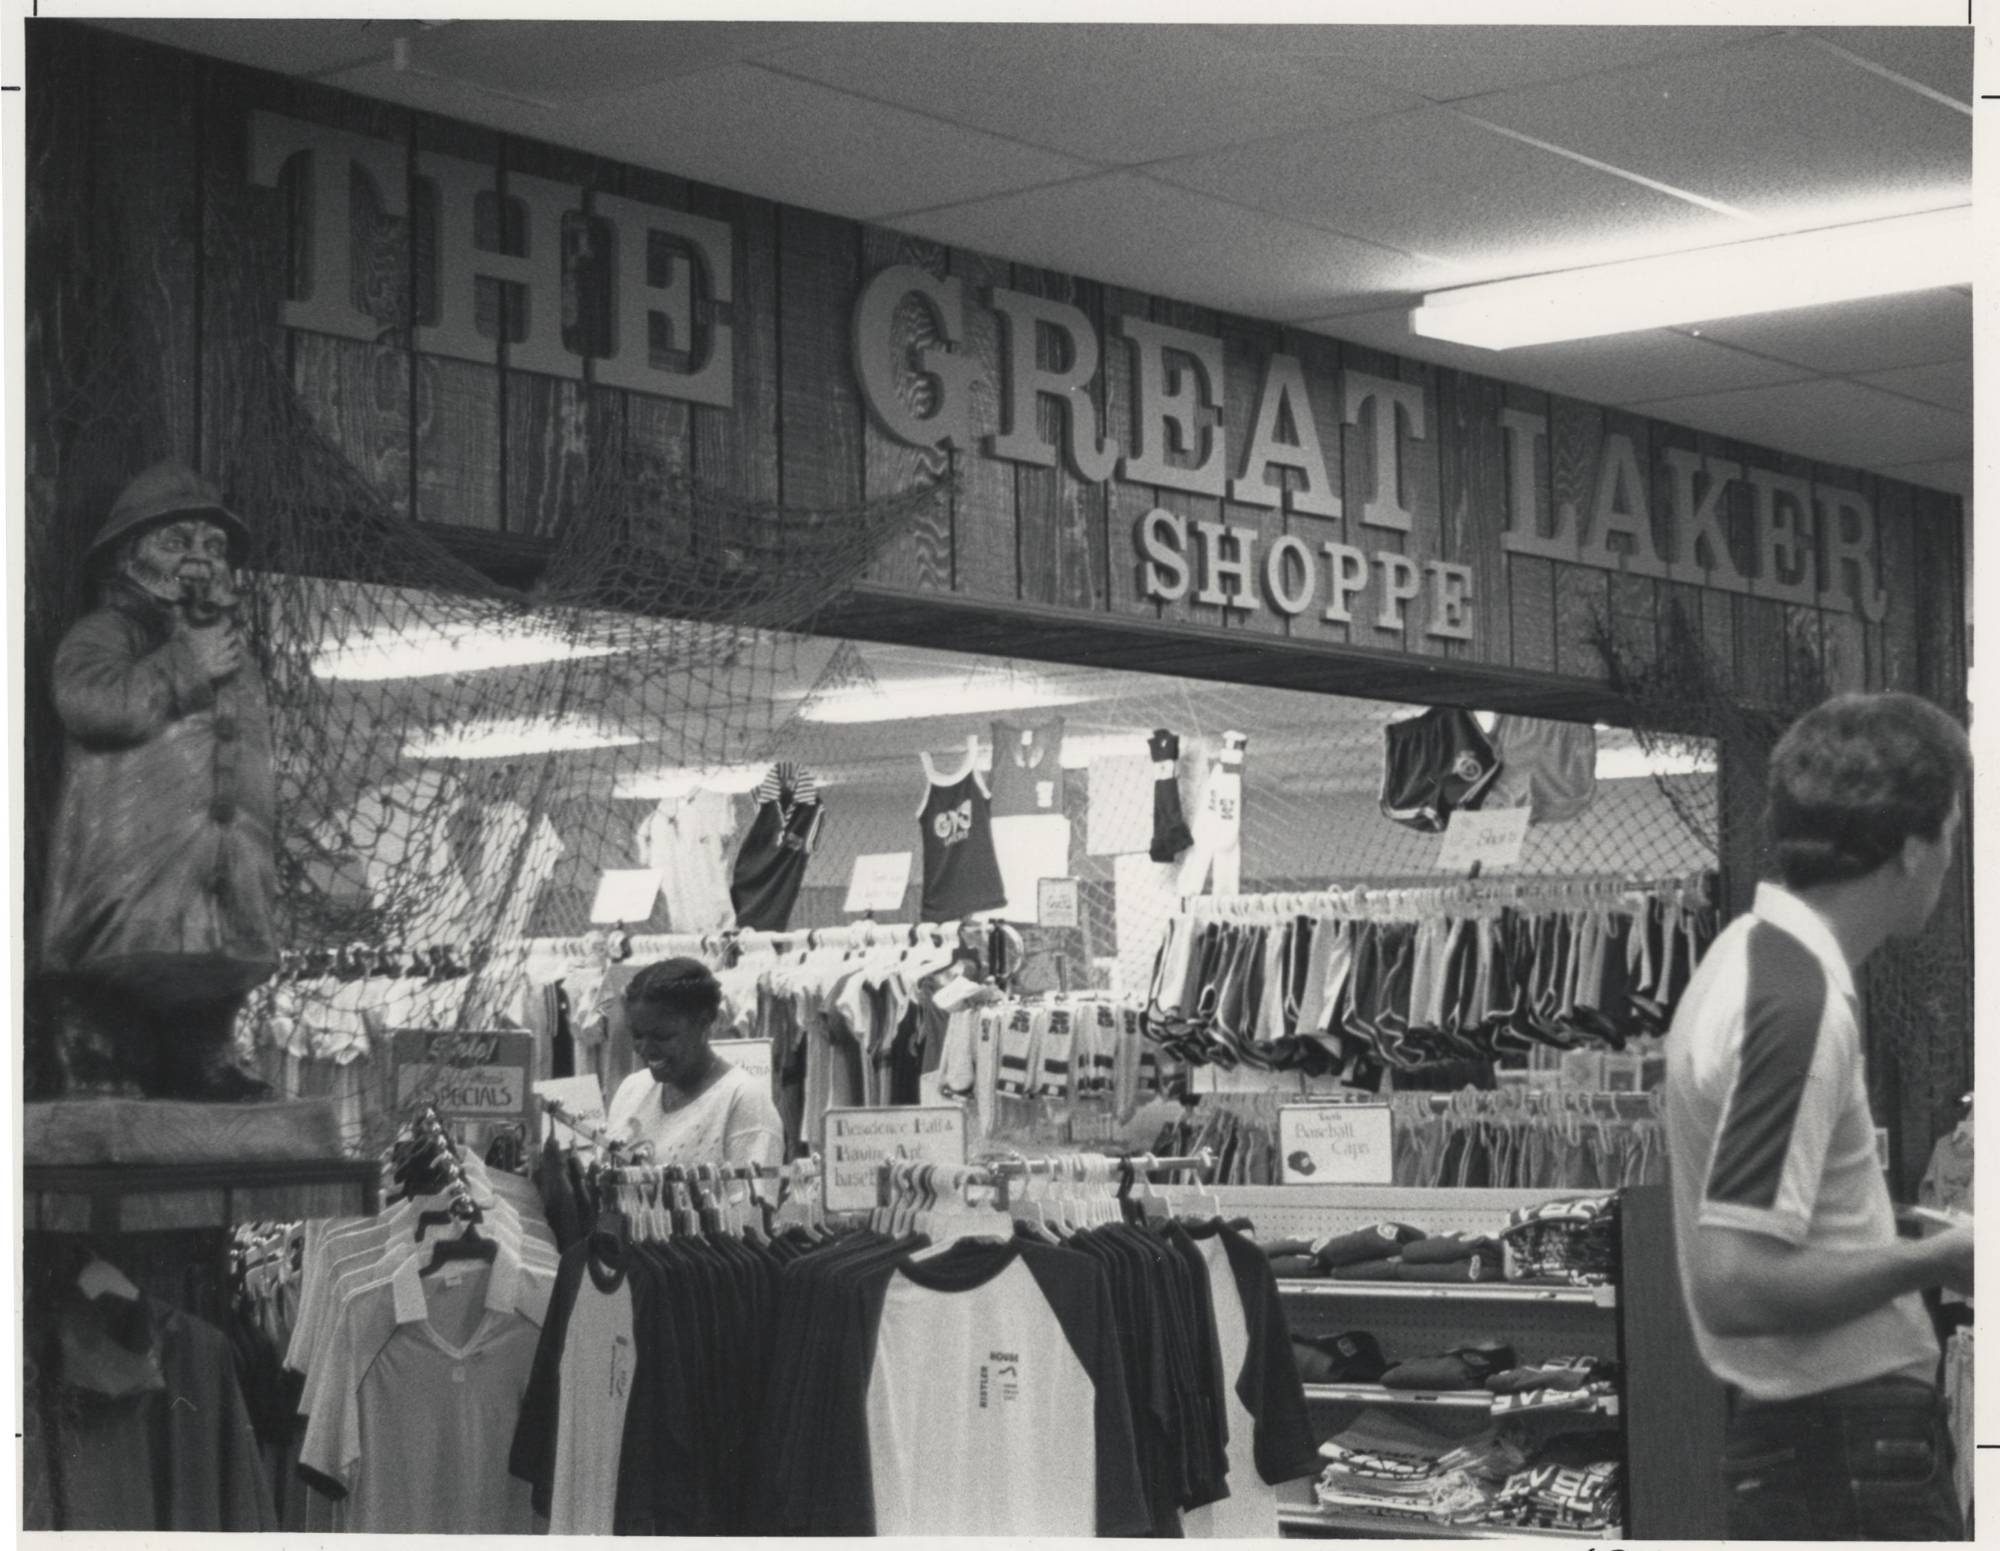 Campus Center bookstore, The Great Laker Shoppe